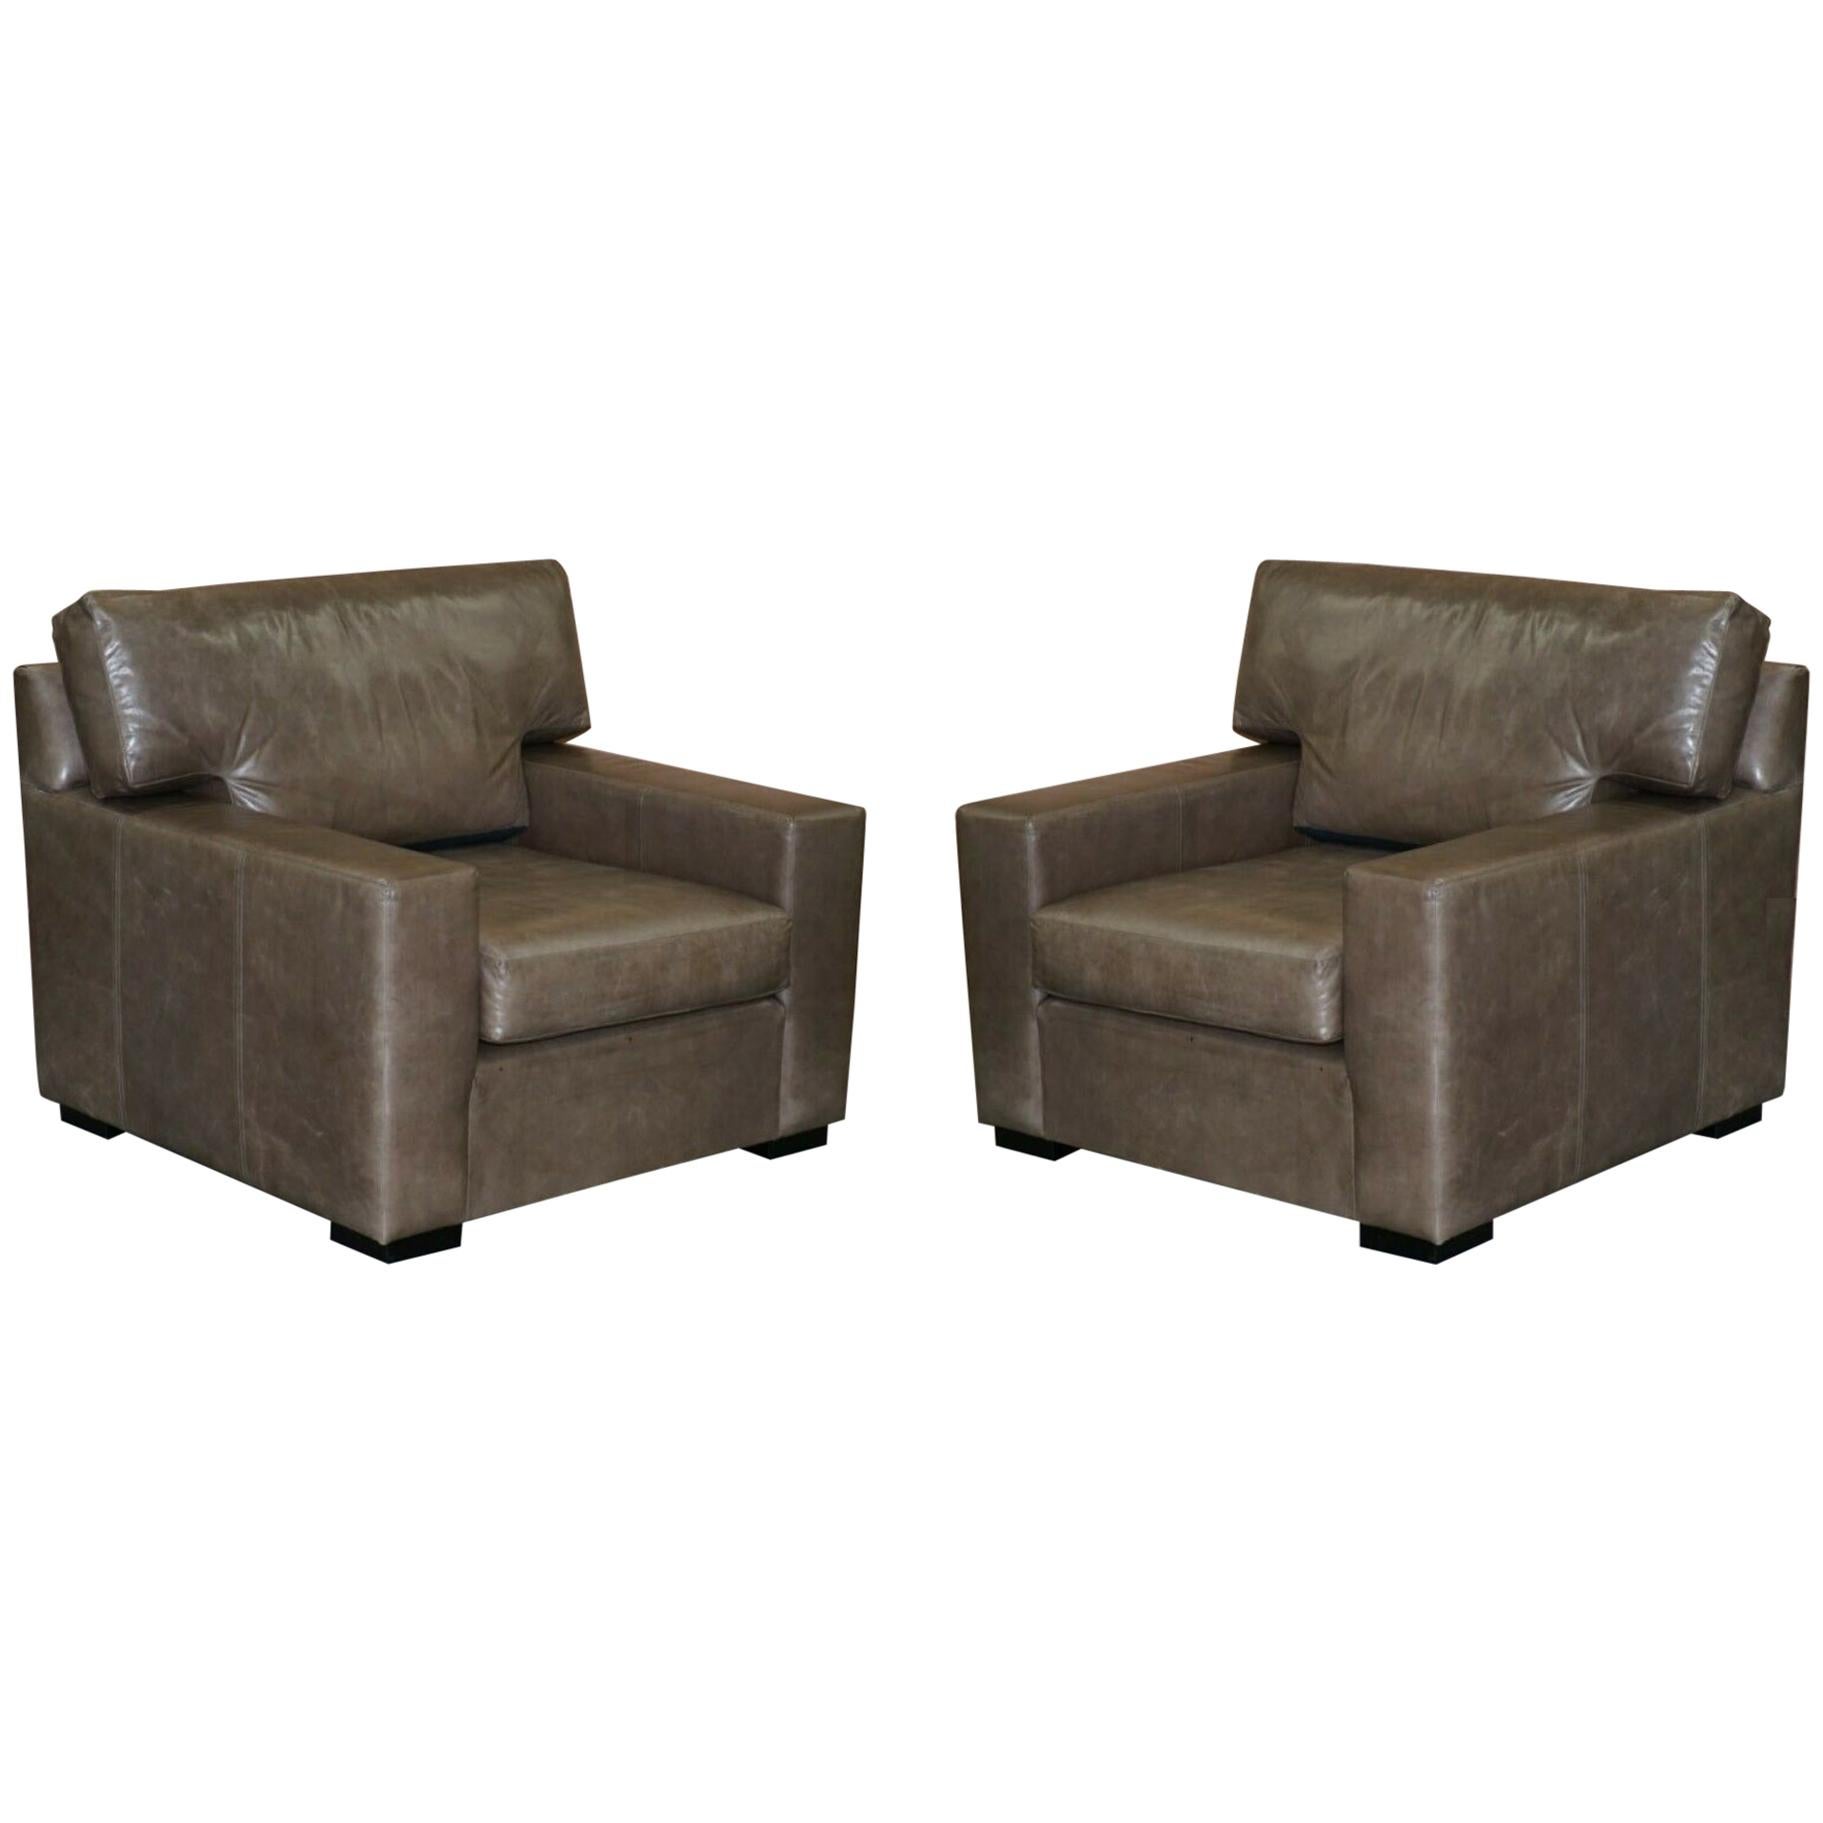 Luxury Pair of Very Large Contemporary Grey Leather Armchairs or Love Seats